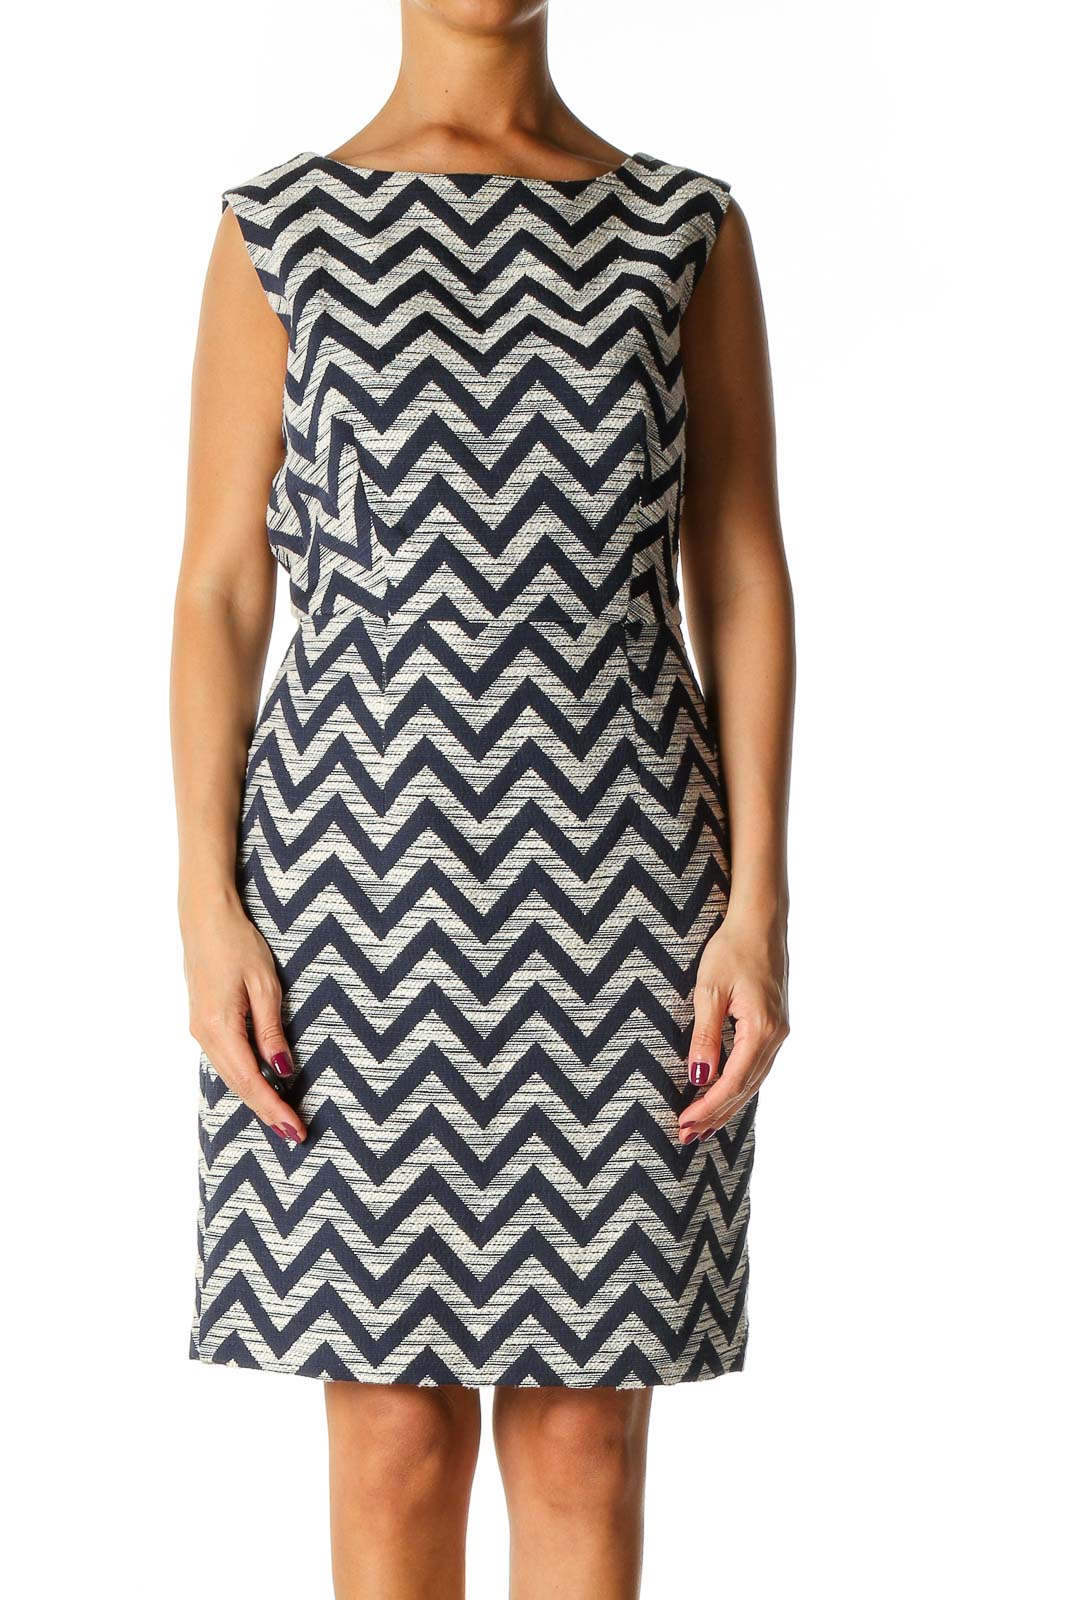 Grey All Day Wear Classic Chevron Dress Front